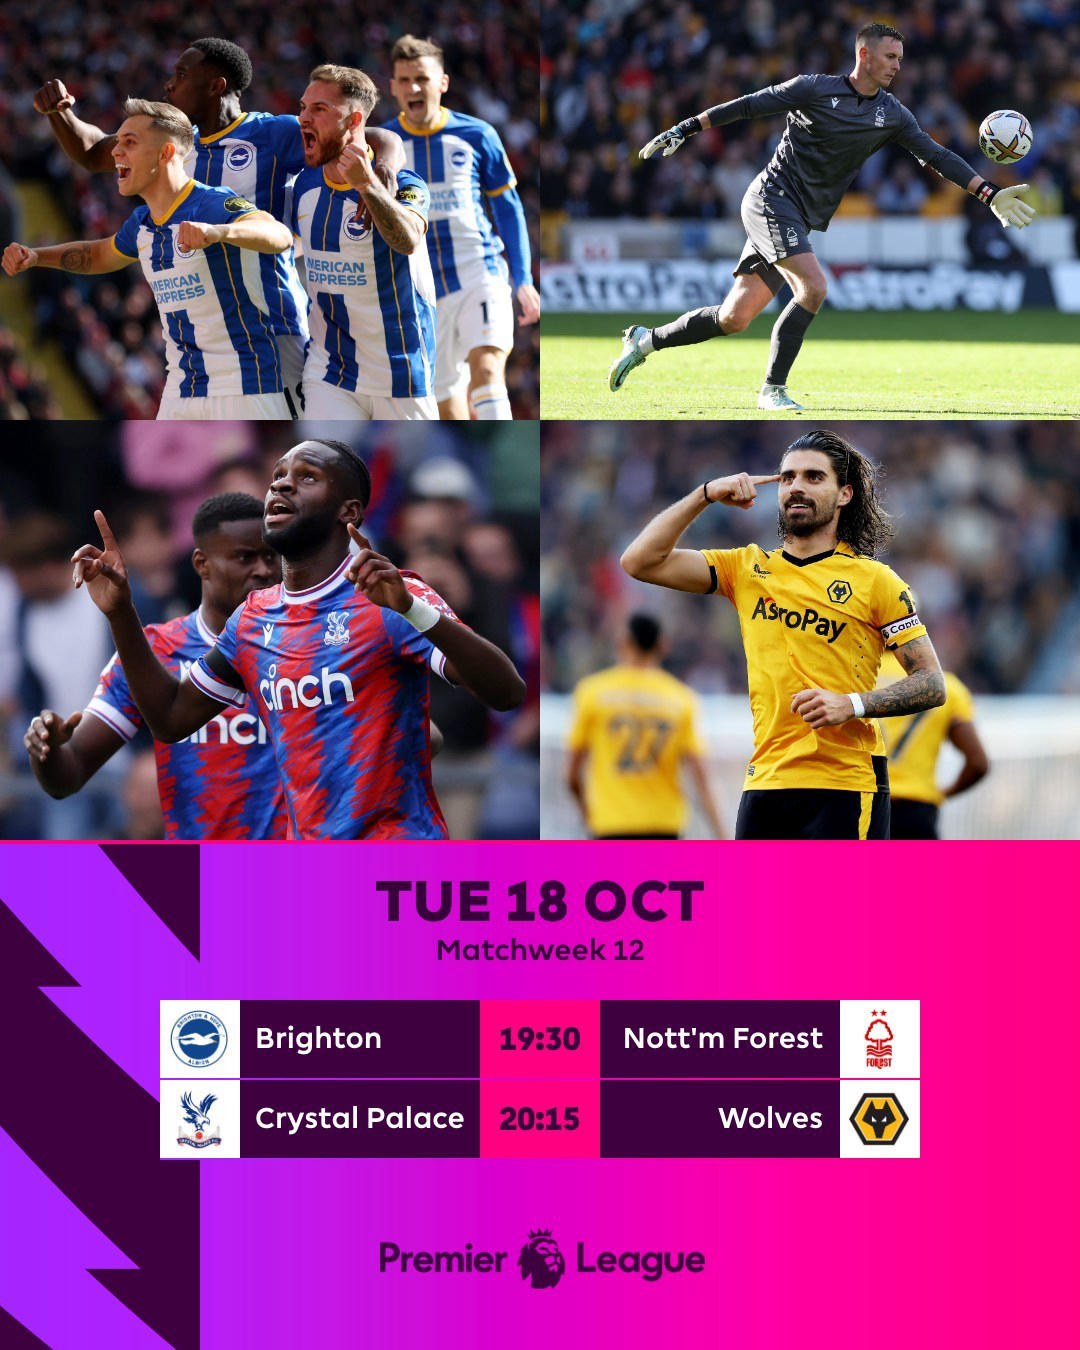 Premier League - Tuesday night under the lights